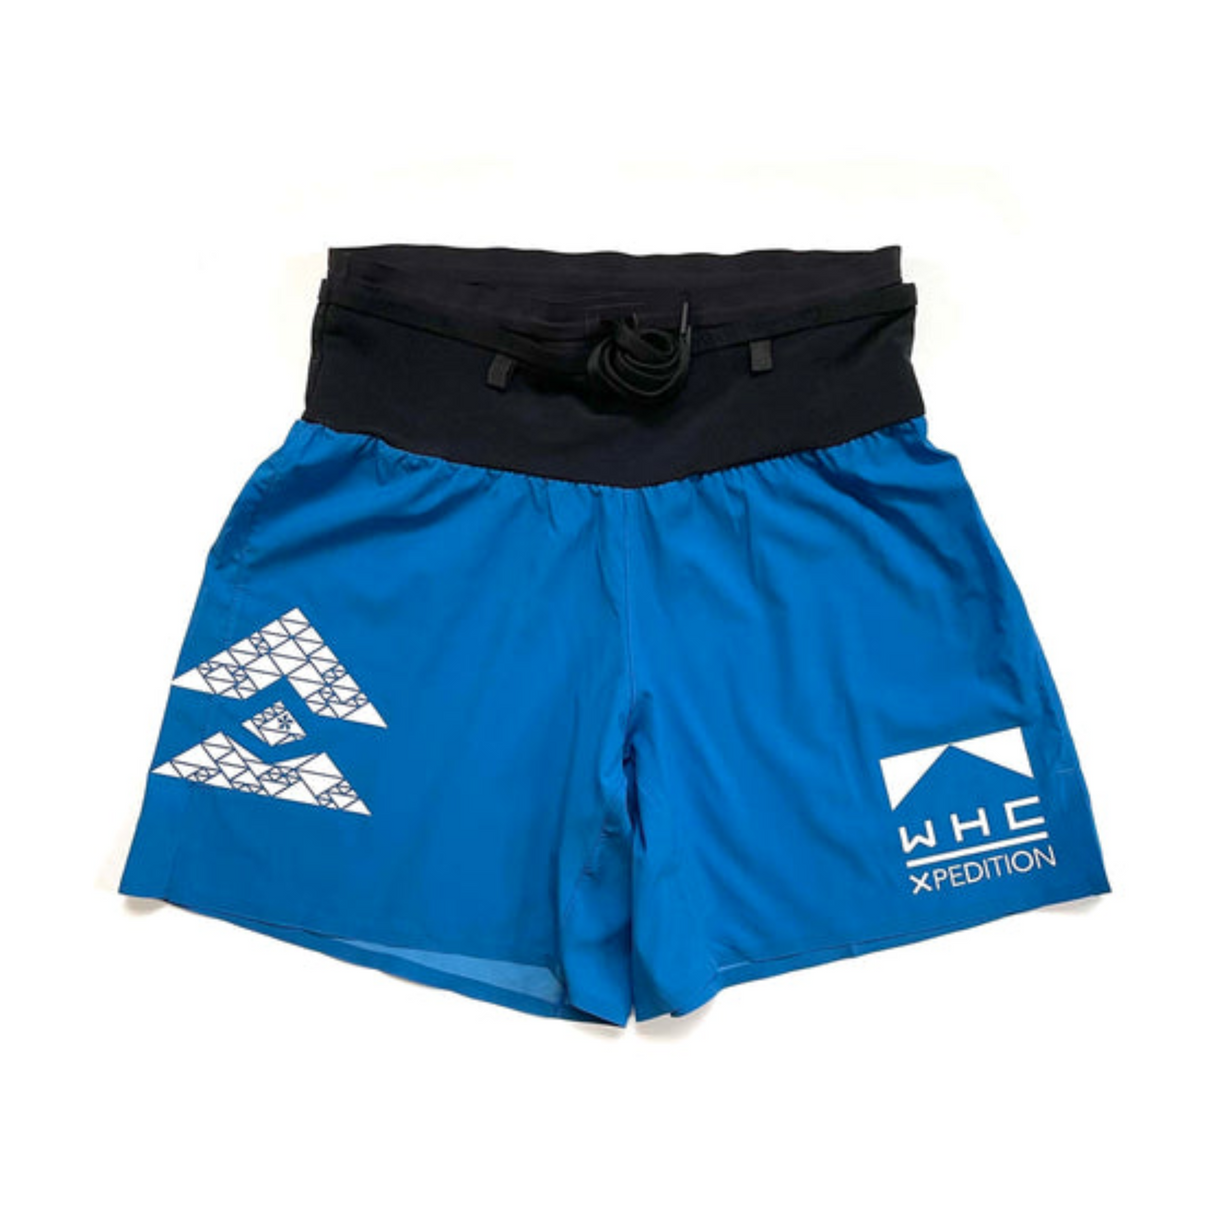 T8 - T8 Men's Sherpa Shorts v2 (WHC) Limited Edition - Cam2 